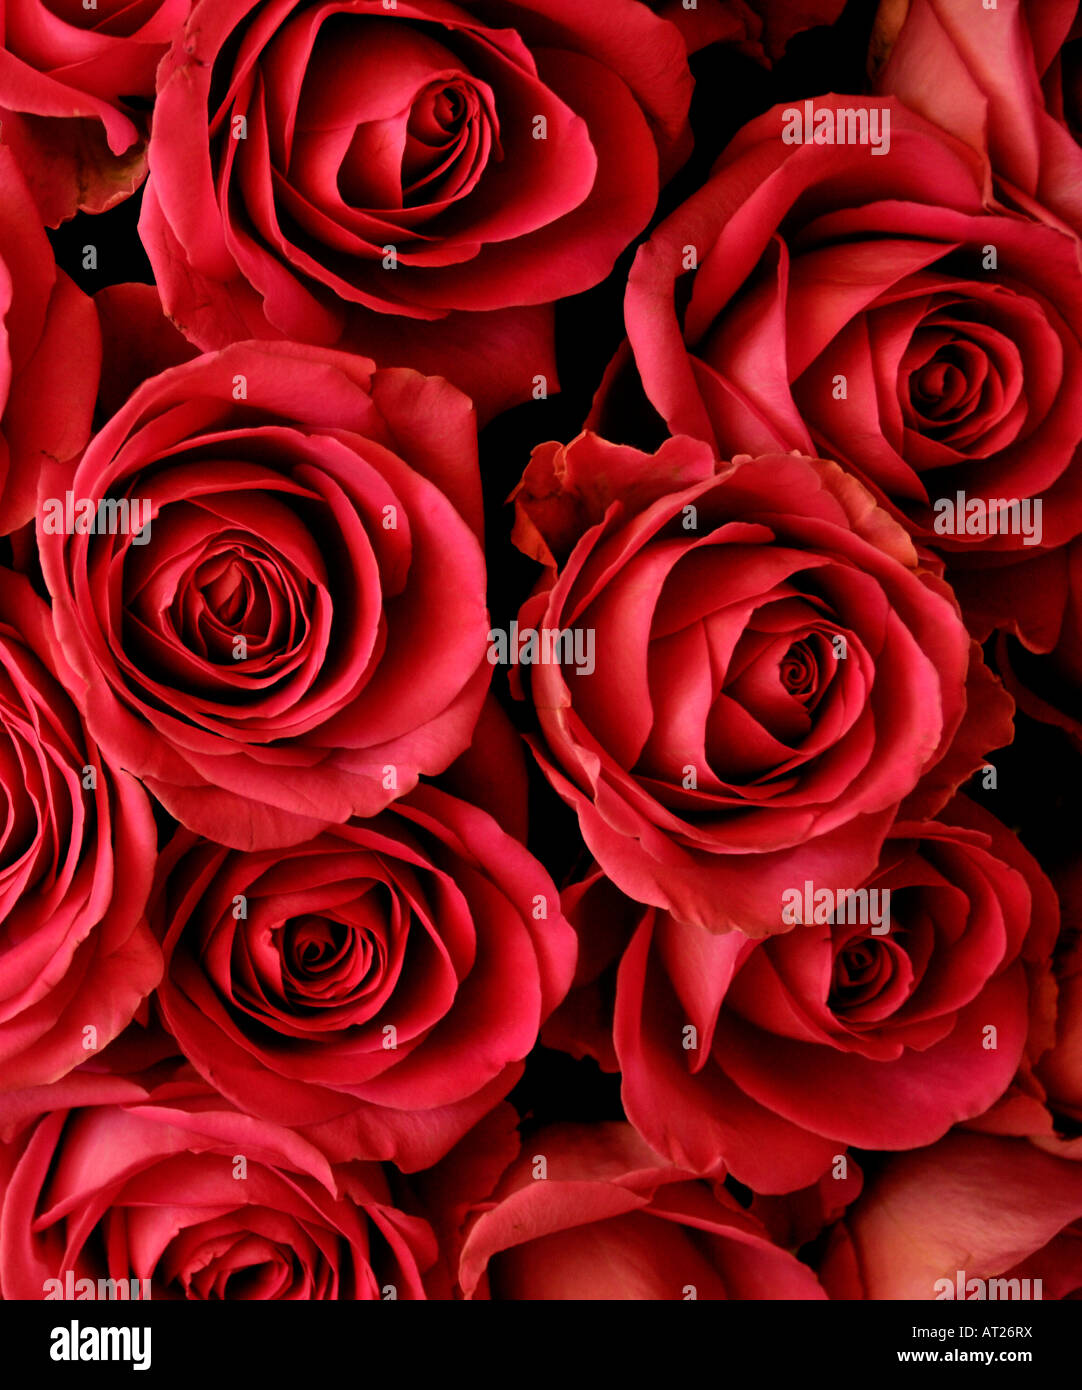 bouquet of red roses Stock Photo